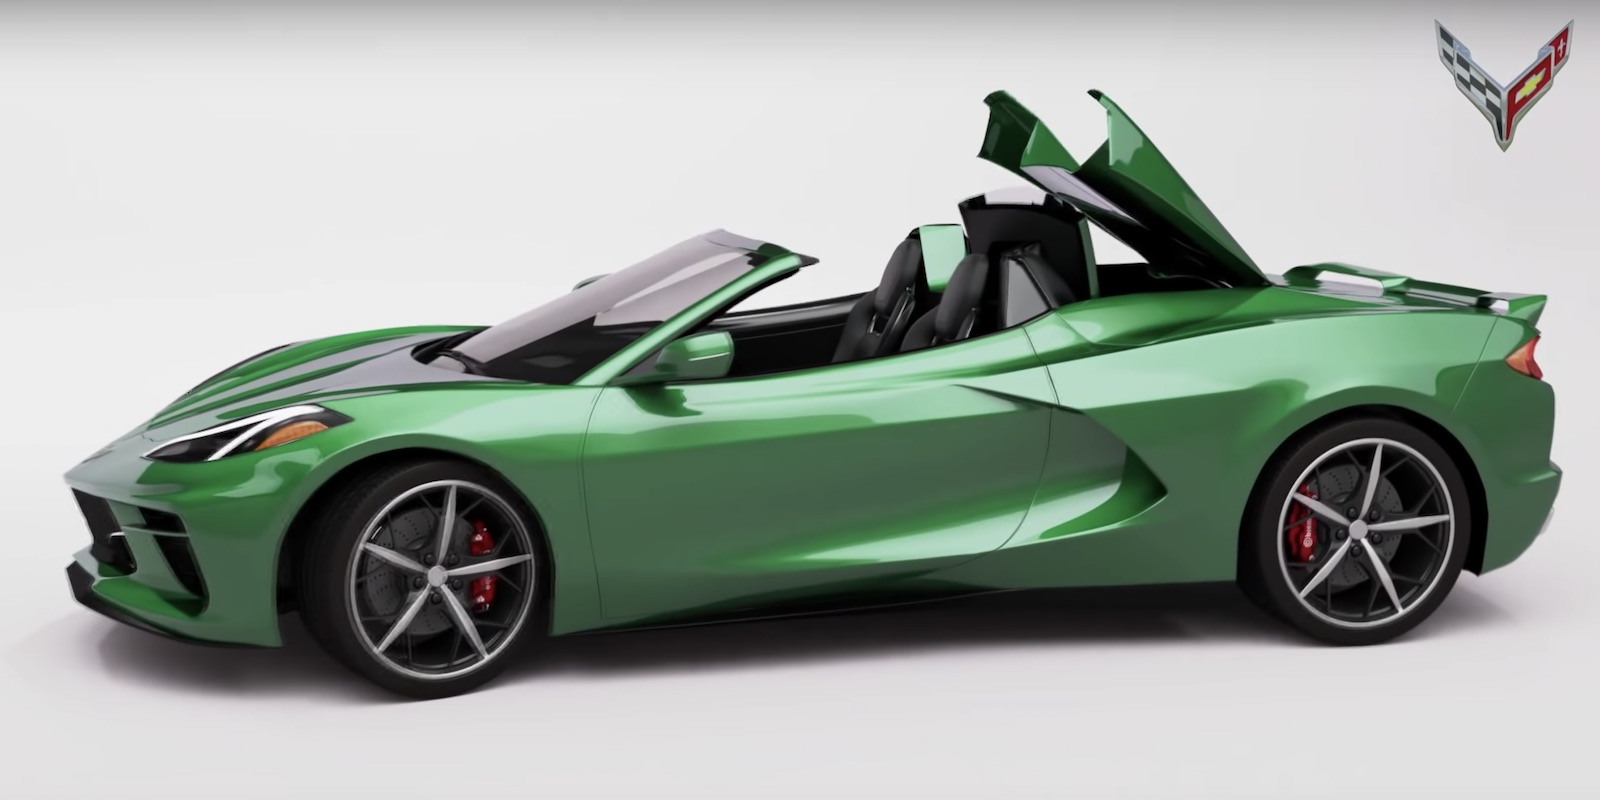 2020 Corvette: Yes Virginia, There is a 2020 Corvette Convertible